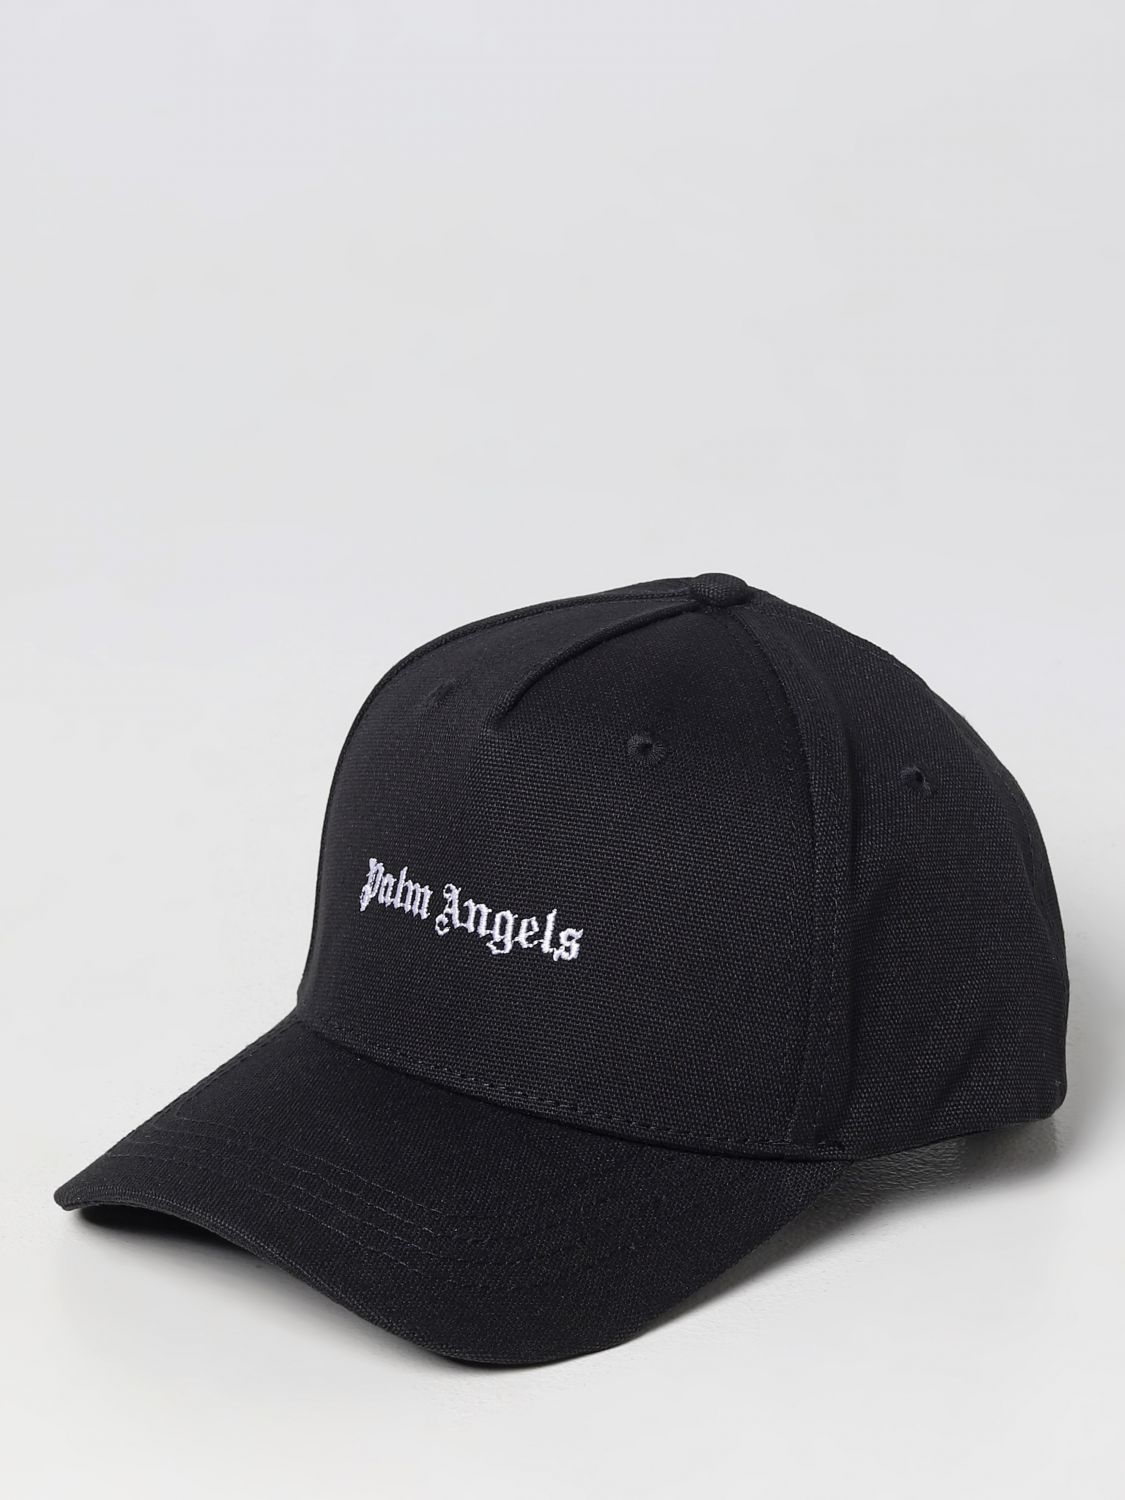 PALM ANGELS: Classic Logo hat in canvas - Black | Palm Angels hat ...